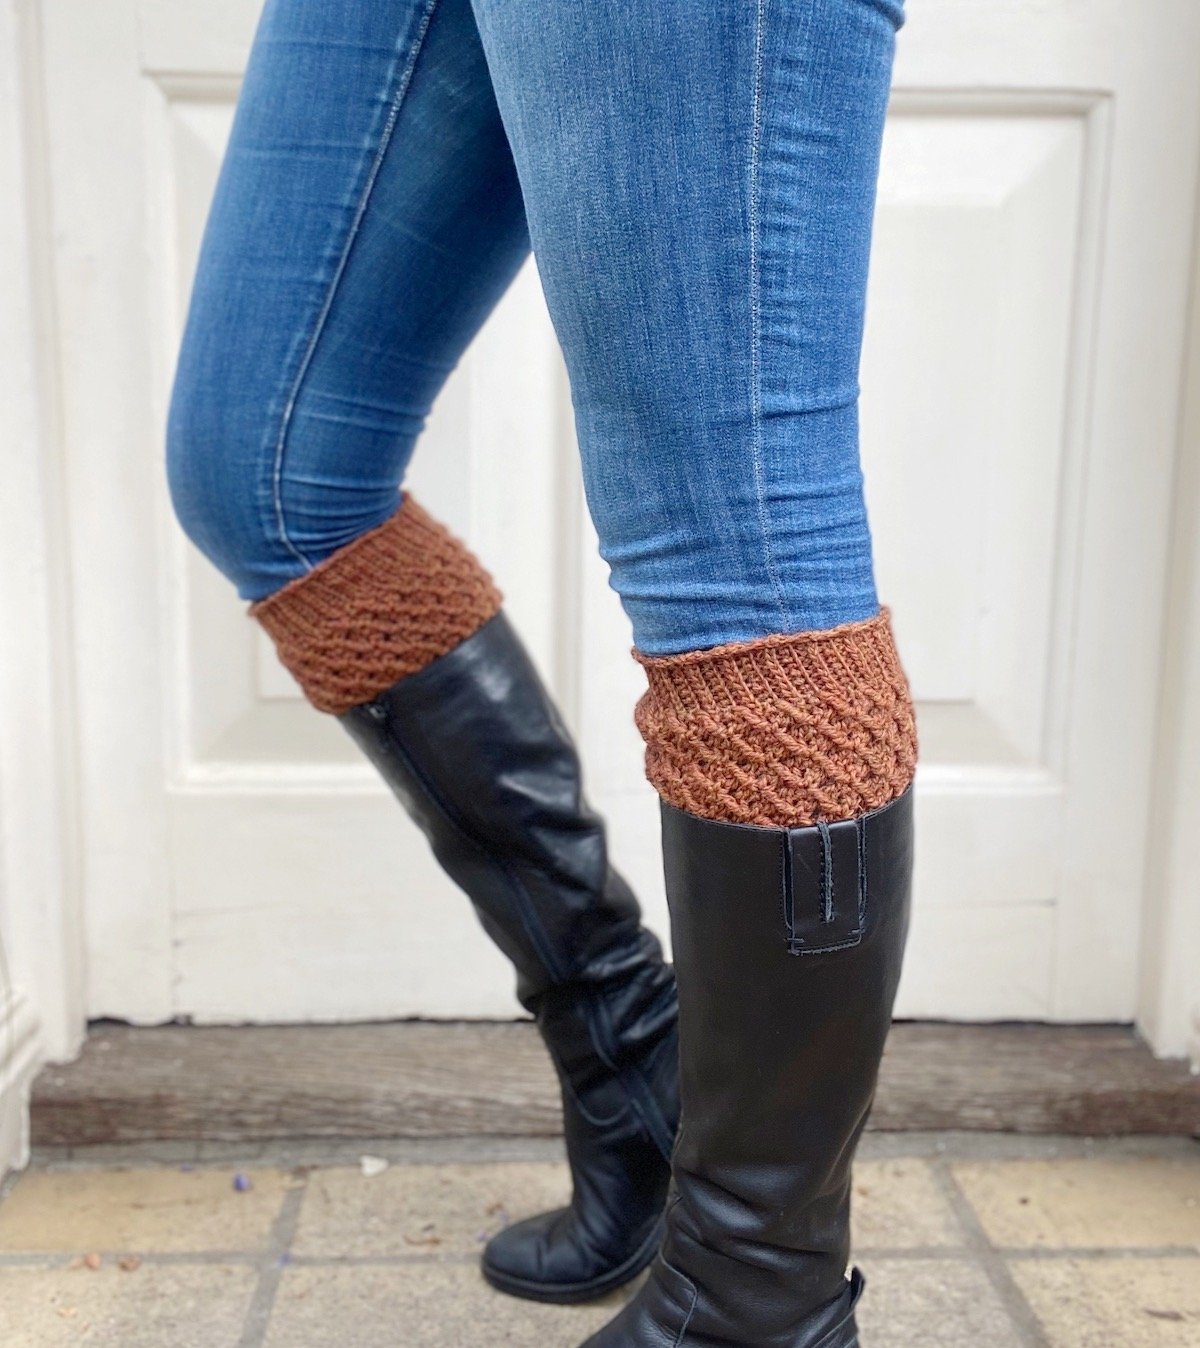 person wearing jeans, knee high boots and textured crochet boot cuffs in a rust colour